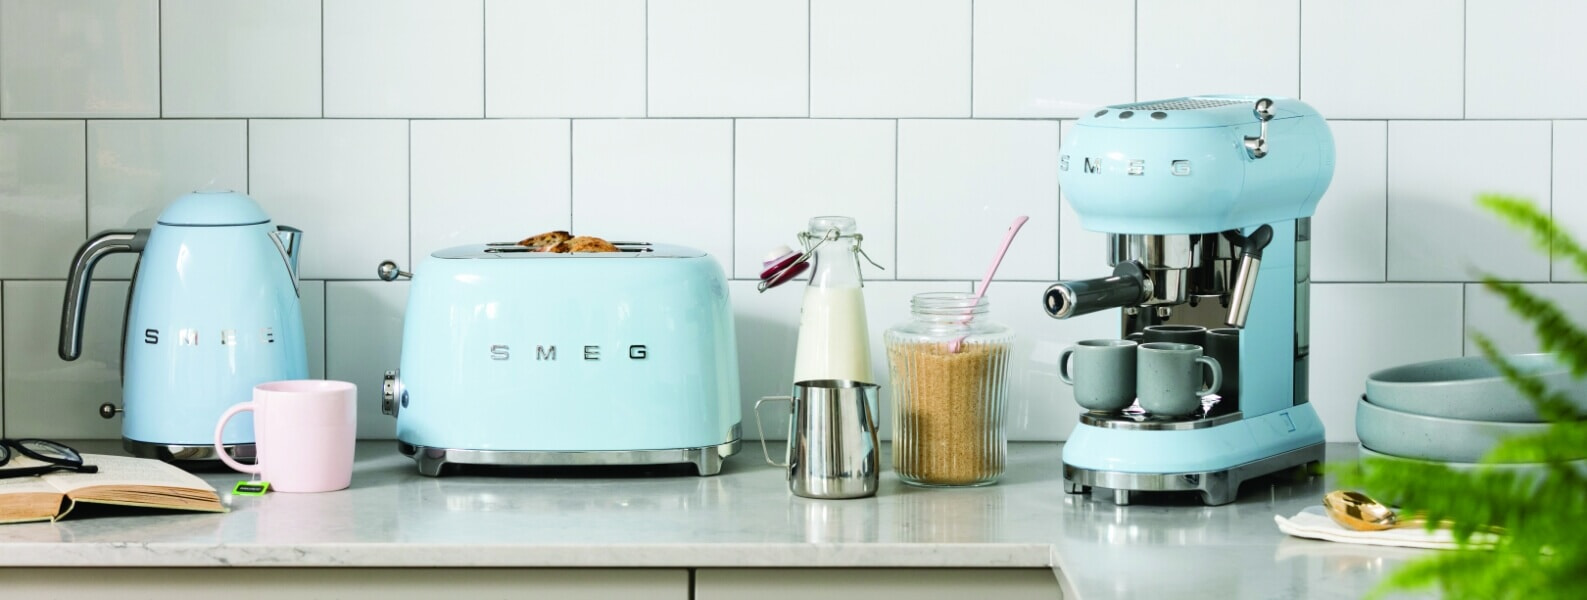 Matching pale blue retro Smeg small kitchen appliances, including a kettle, toaster, and a coffee machine on a grey kitchen bench